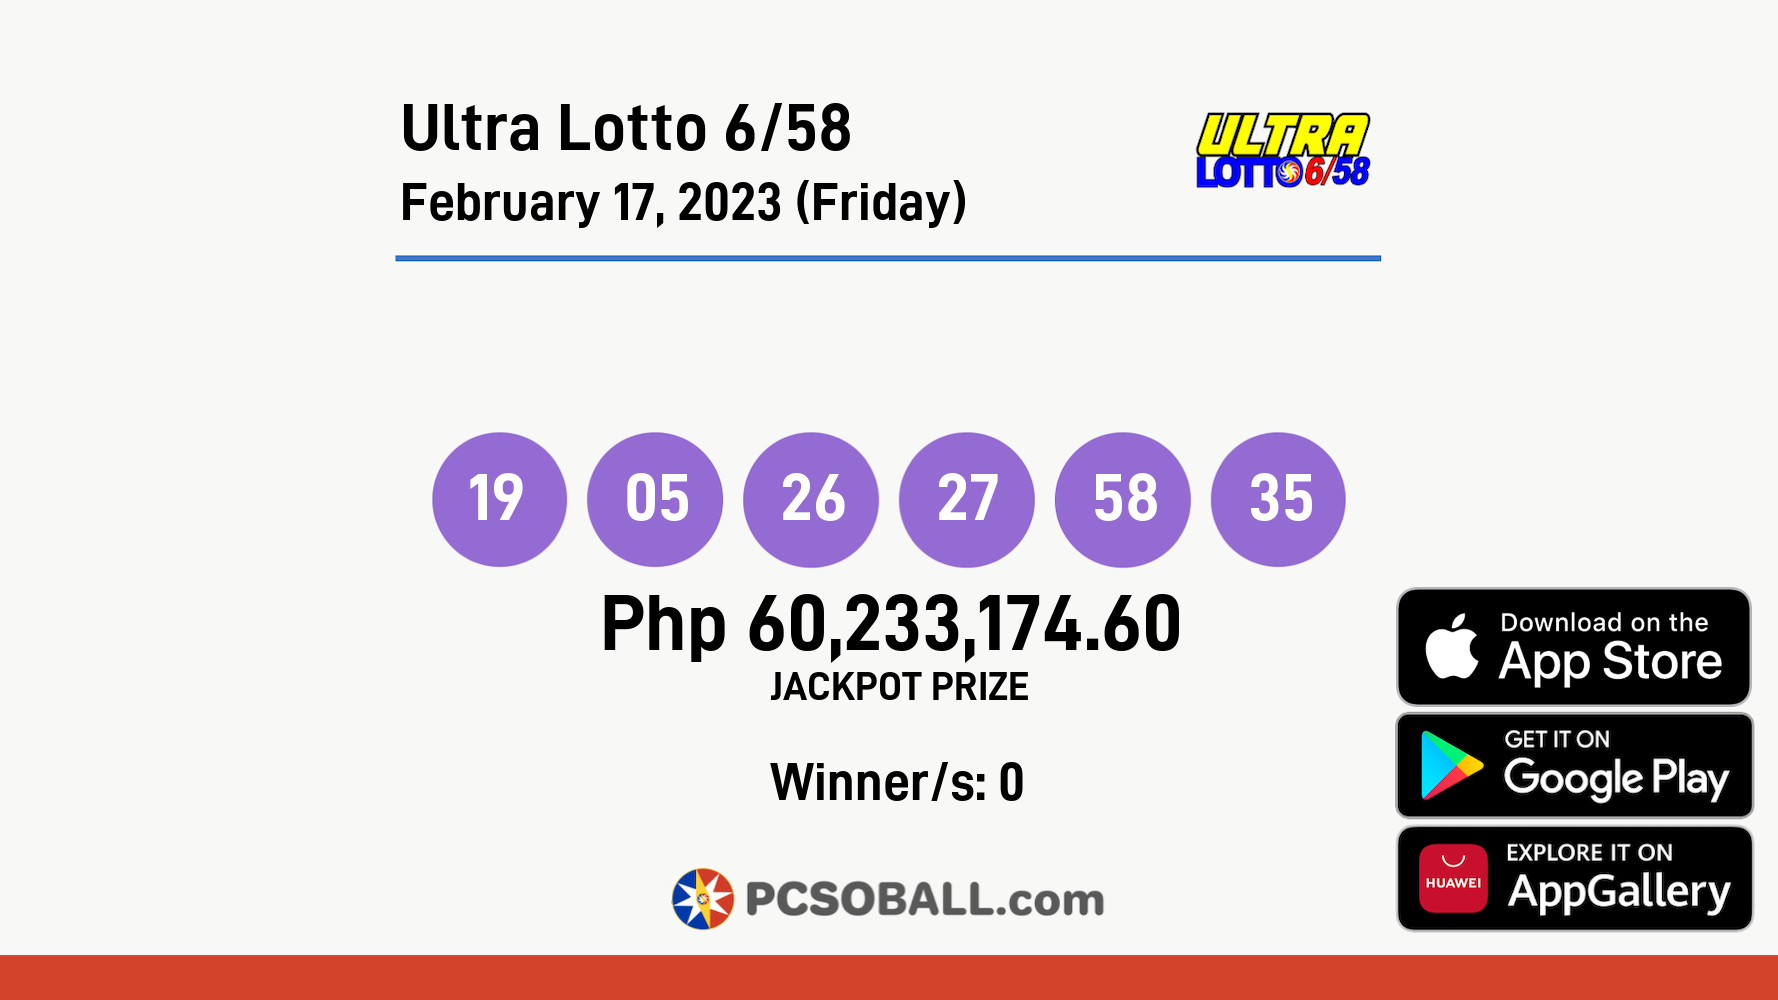 Ultra Lotto 6/58 February 17, 2023 (Friday) Result